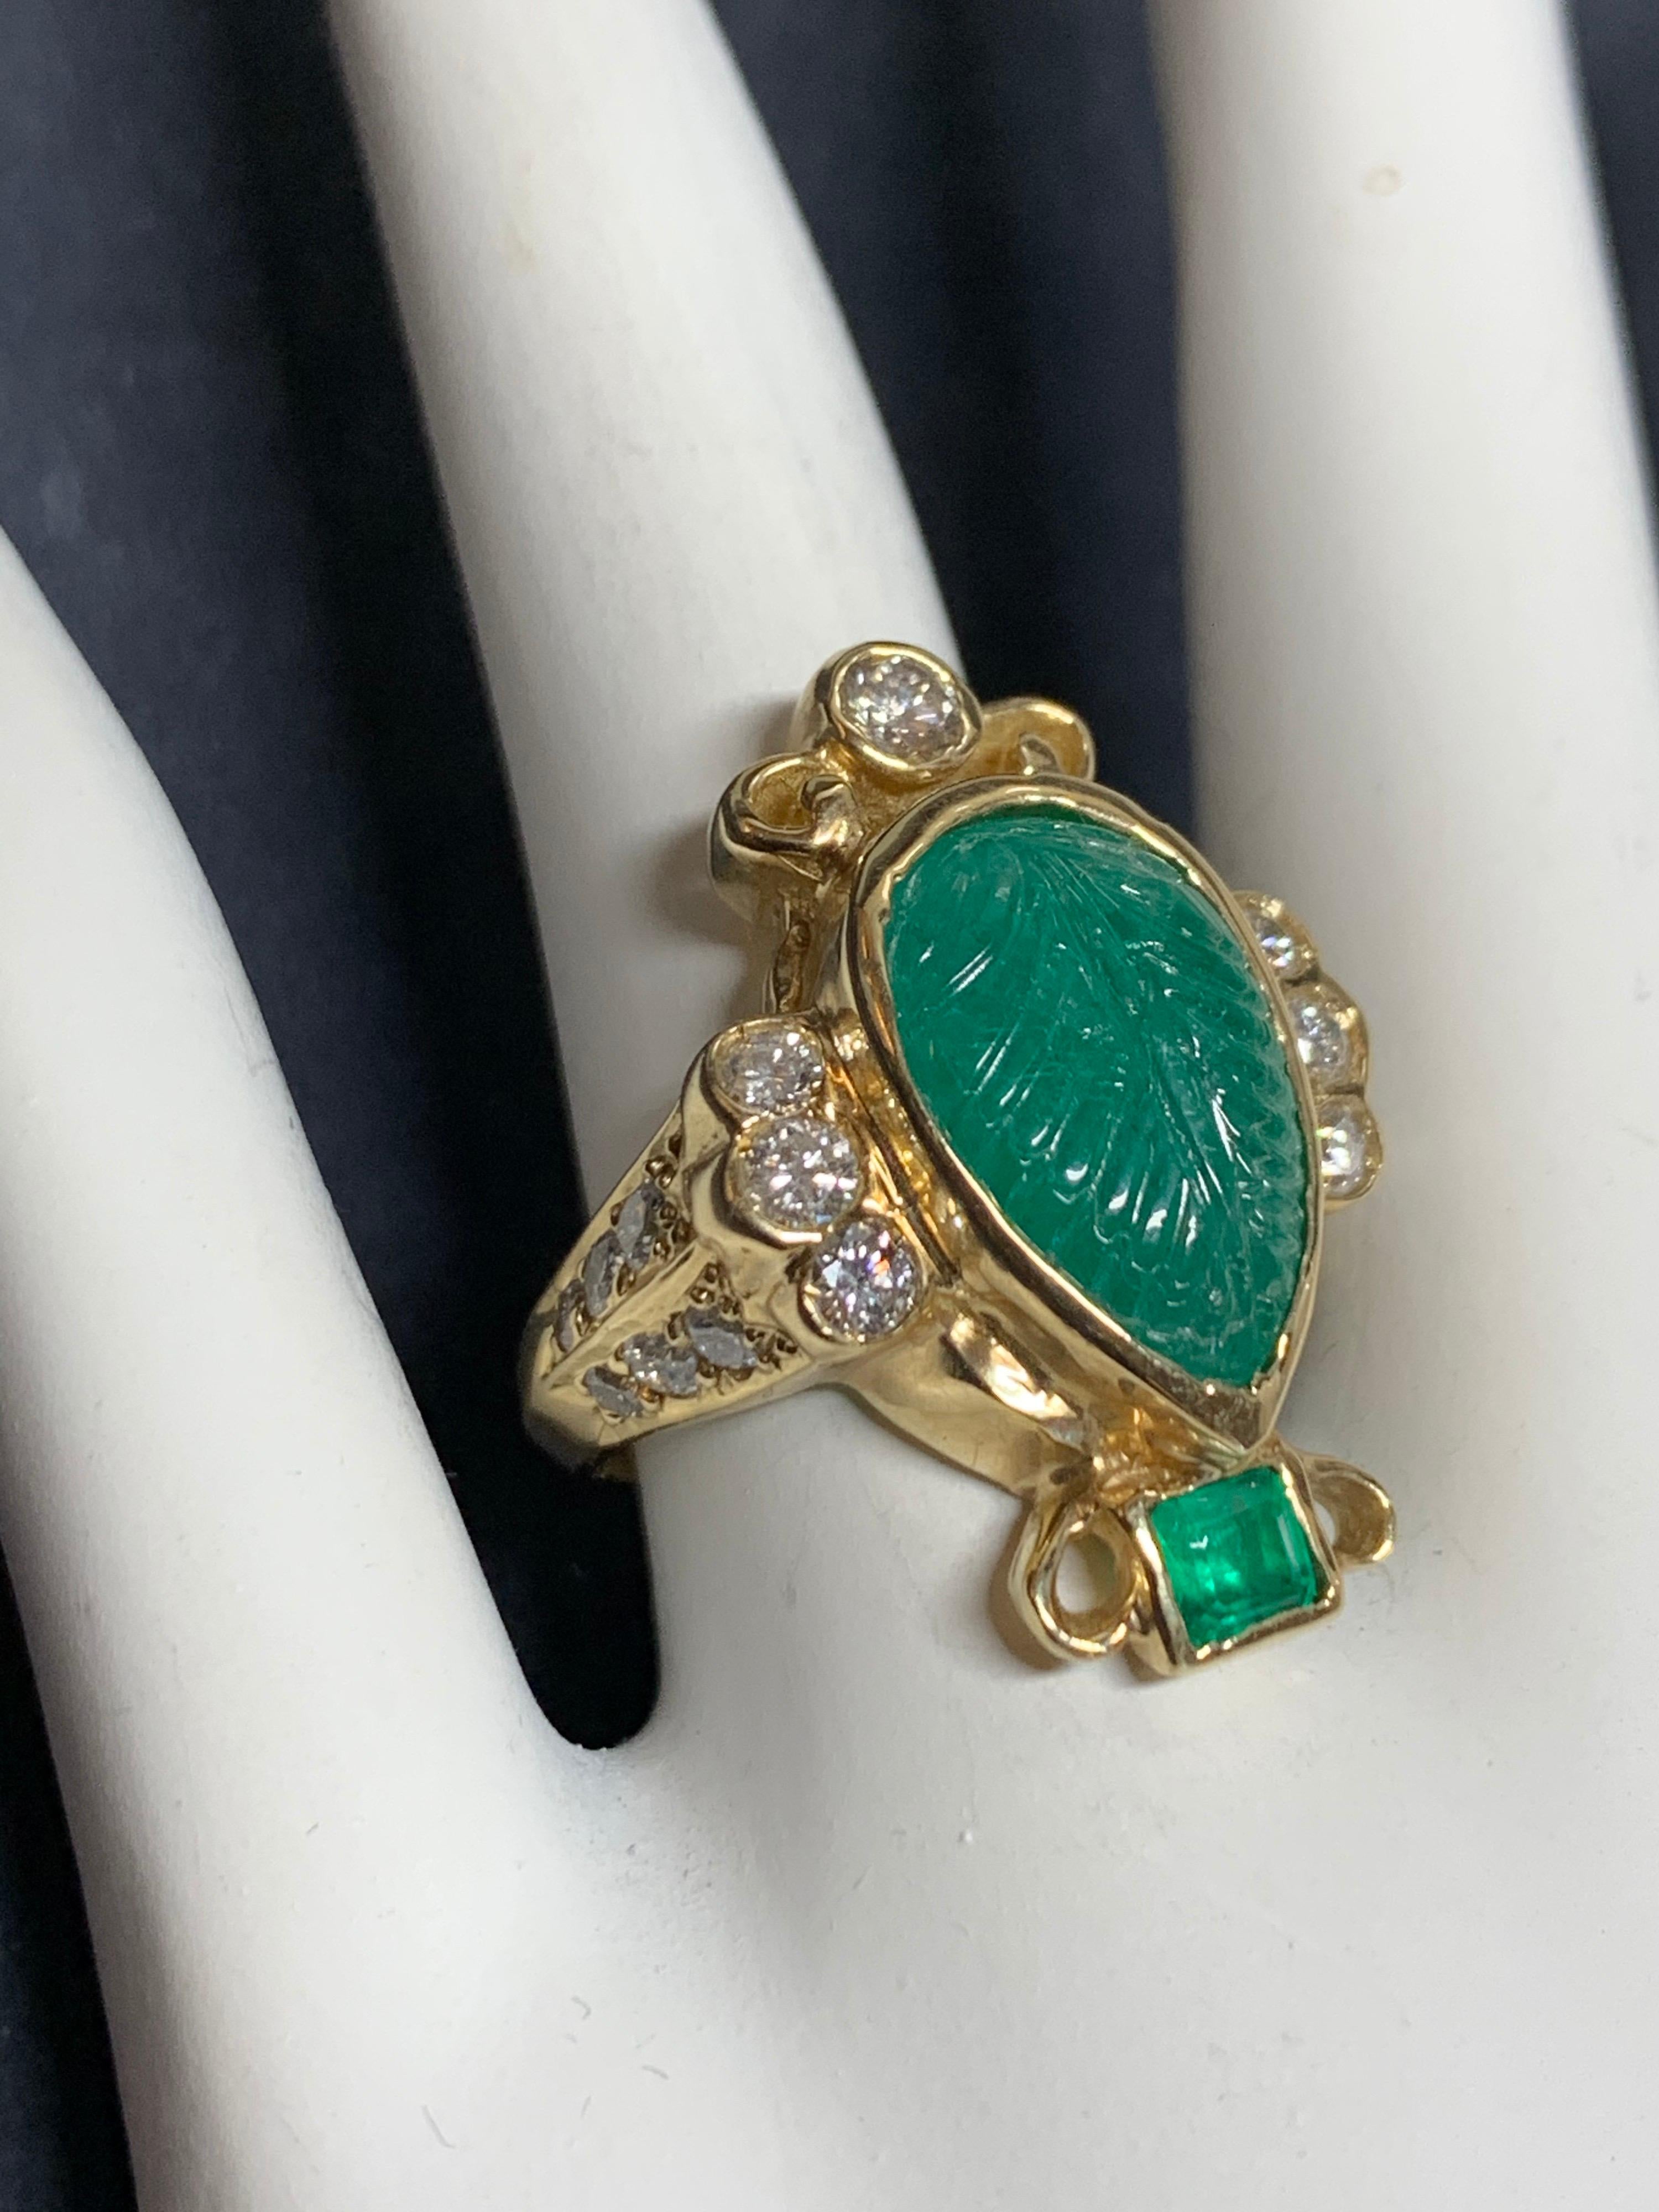 Retro Gold Ring 6 Carat Natural Carved Emerald, Diamond Cocktail Ring circa 1950 In Good Condition For Sale In Los Angeles, CA